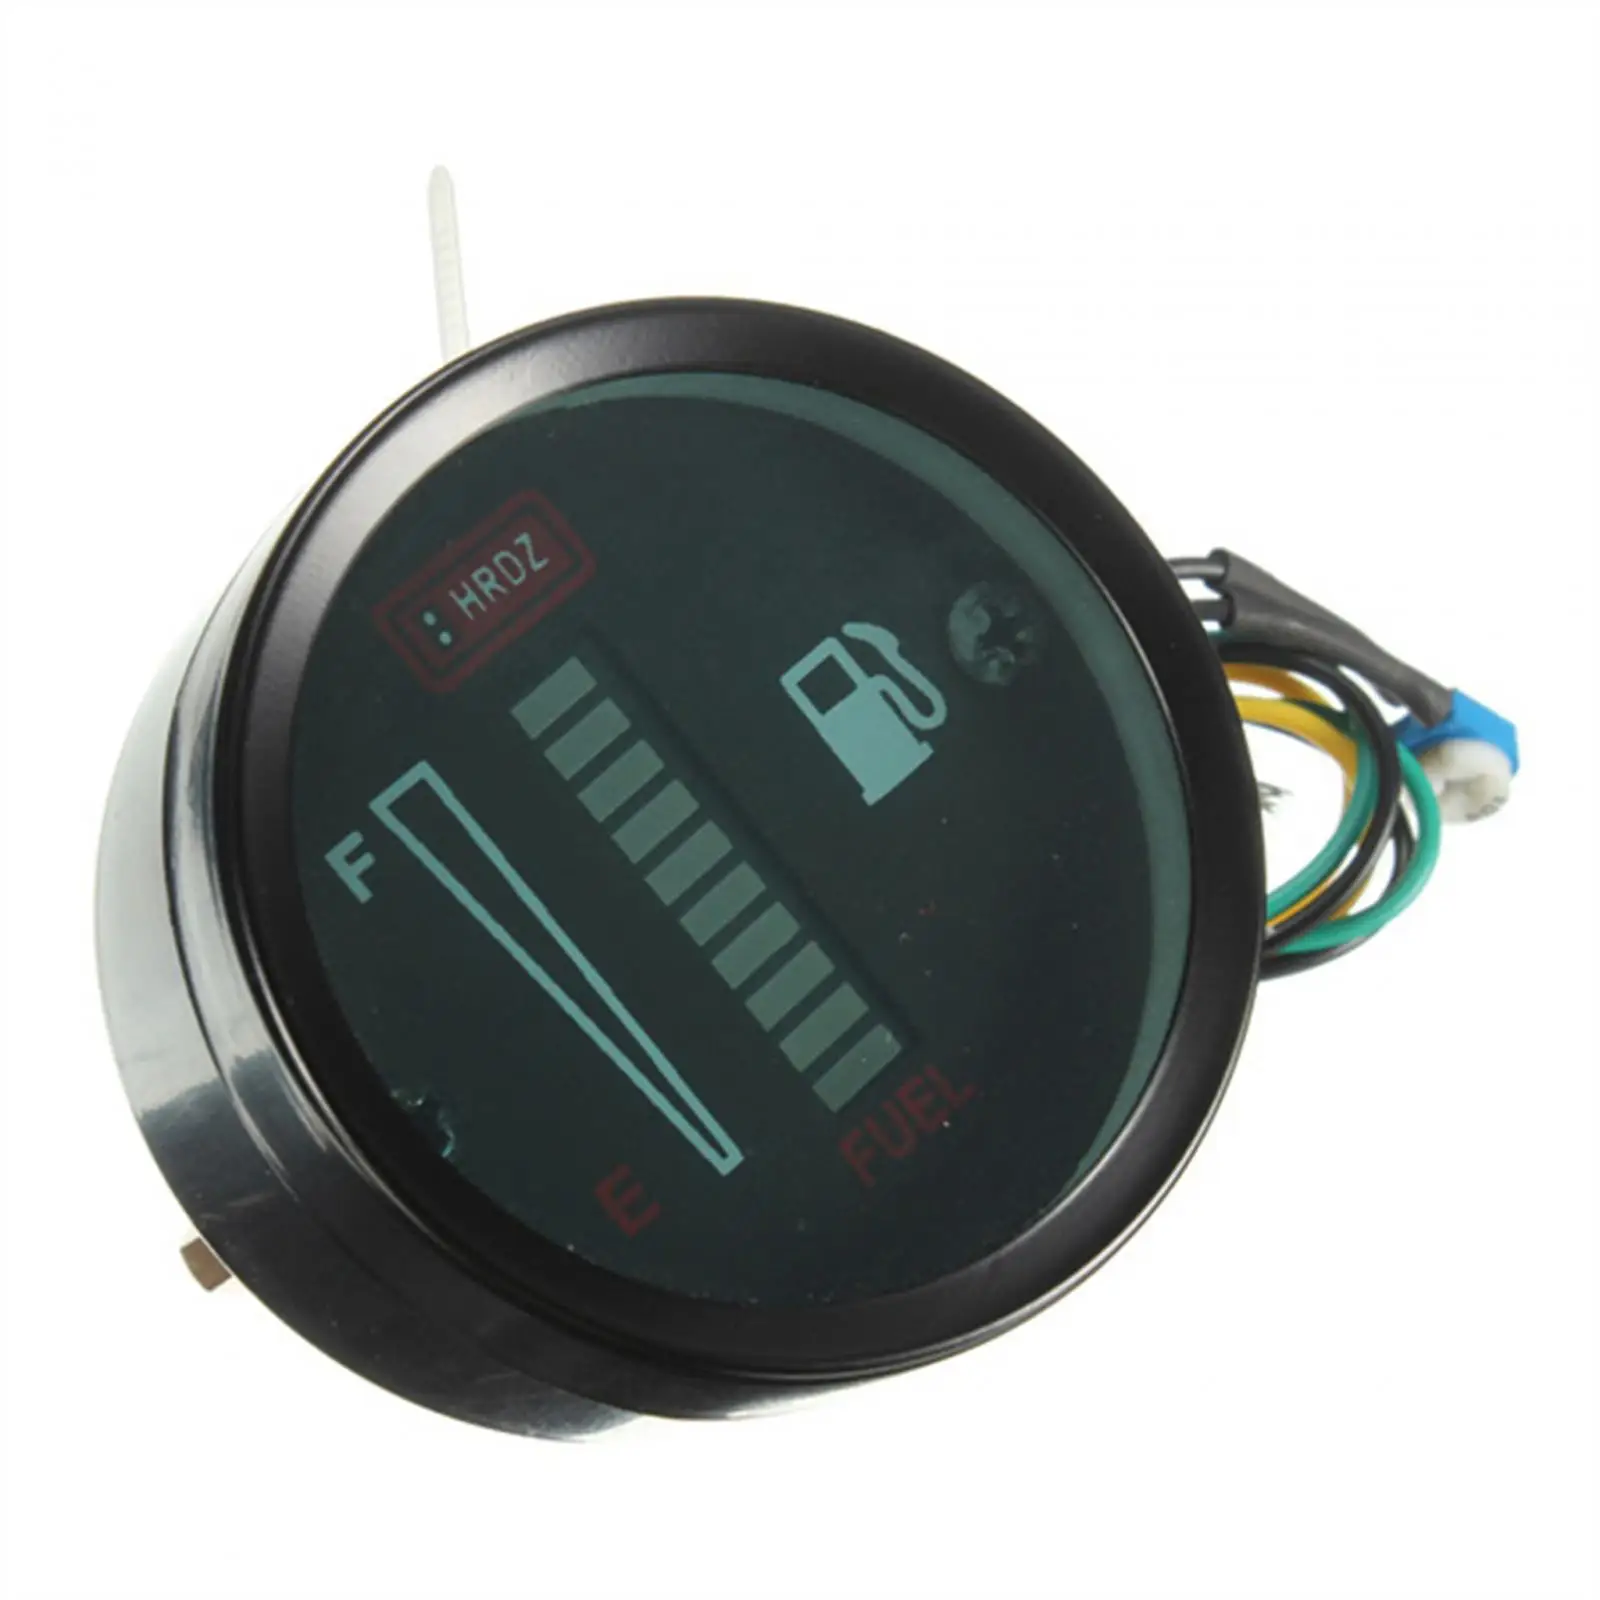 Car Motorcycle Fuel Level Display Gauge Replacement Vehicle SUV Large Screen 52mm 1 Yellow LED 1 Red LED 8 Blue LED Display 12V